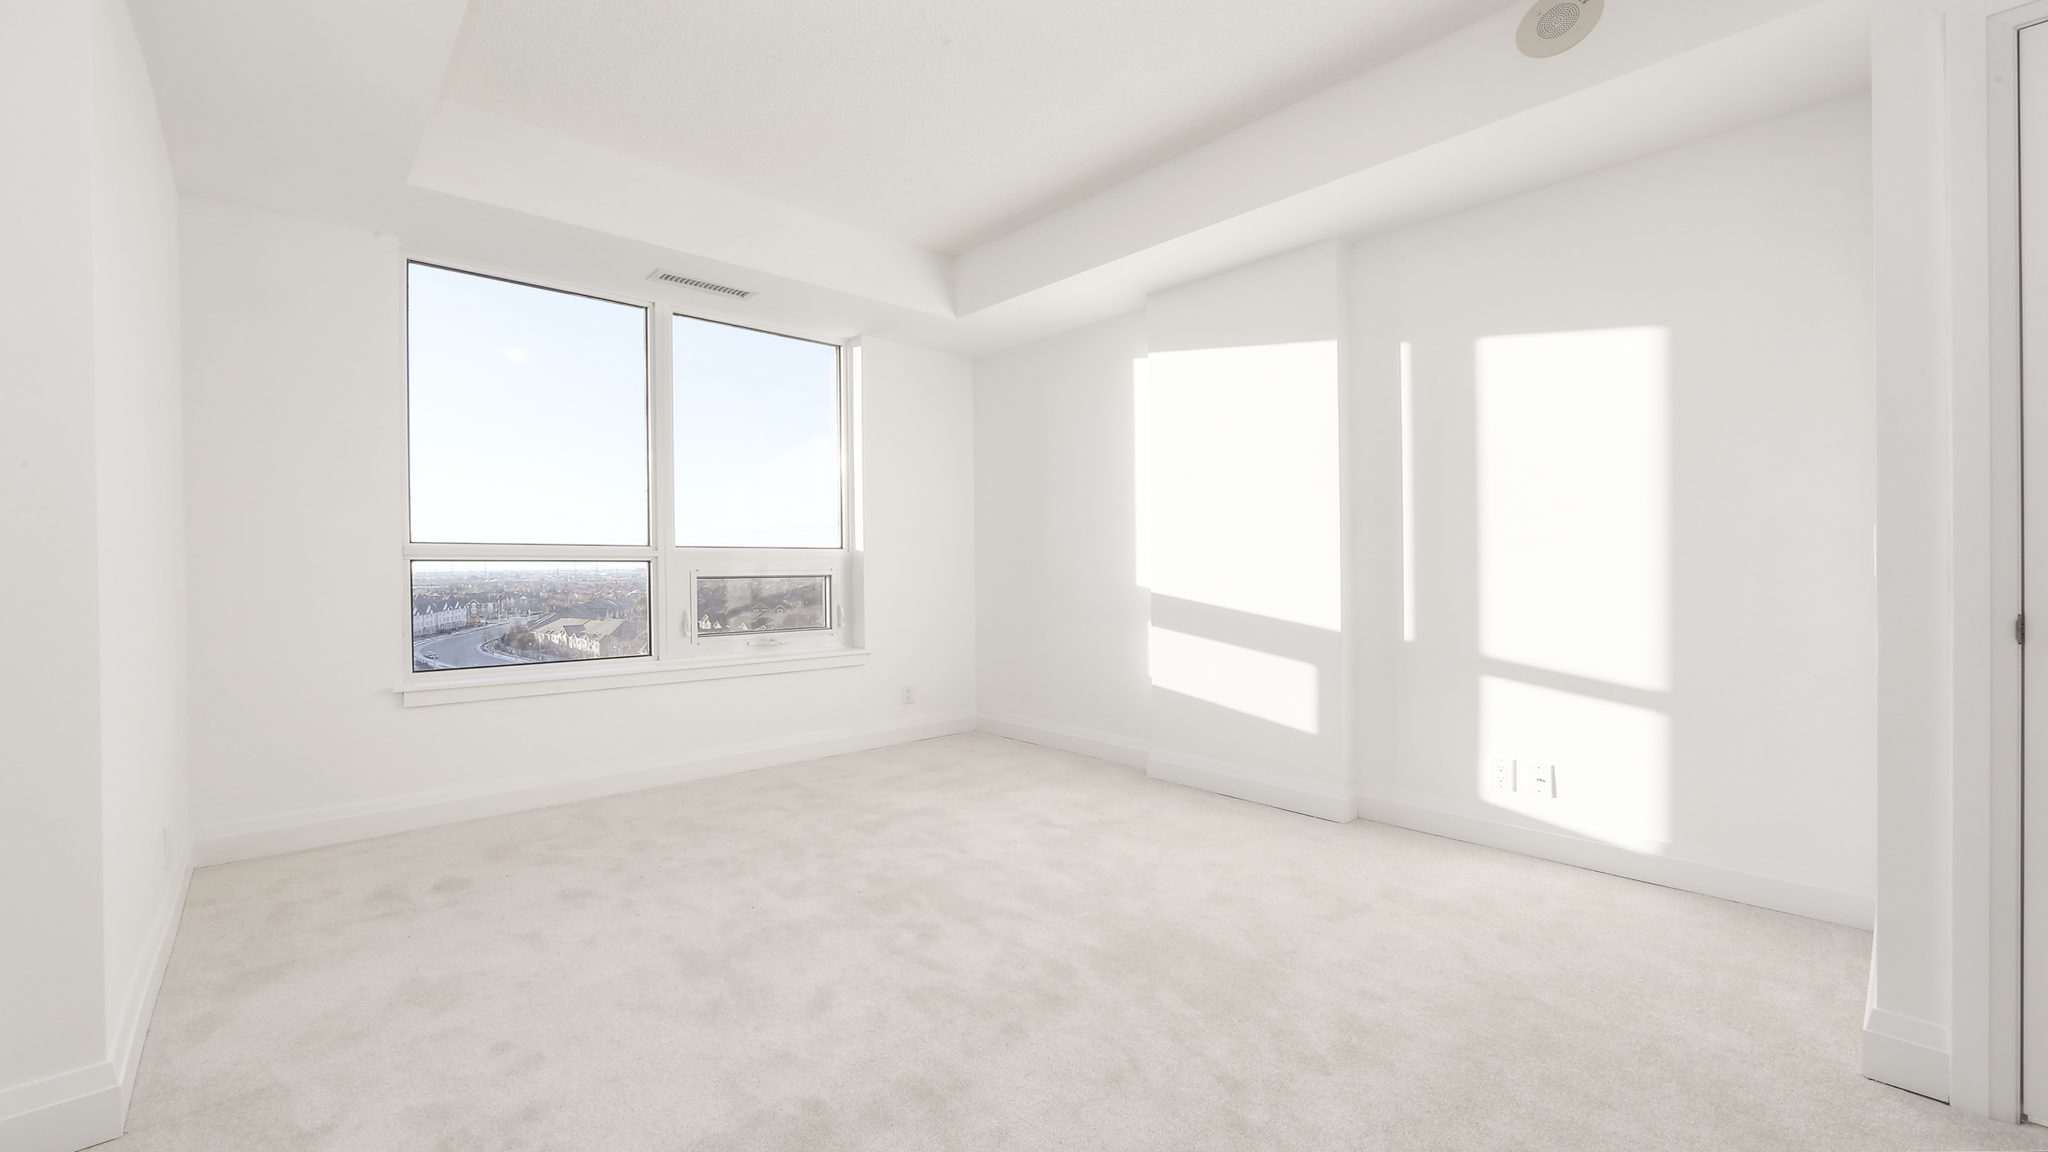 Bedroom photo showing windows and sunlight. The white carpet almost blends into the walls.